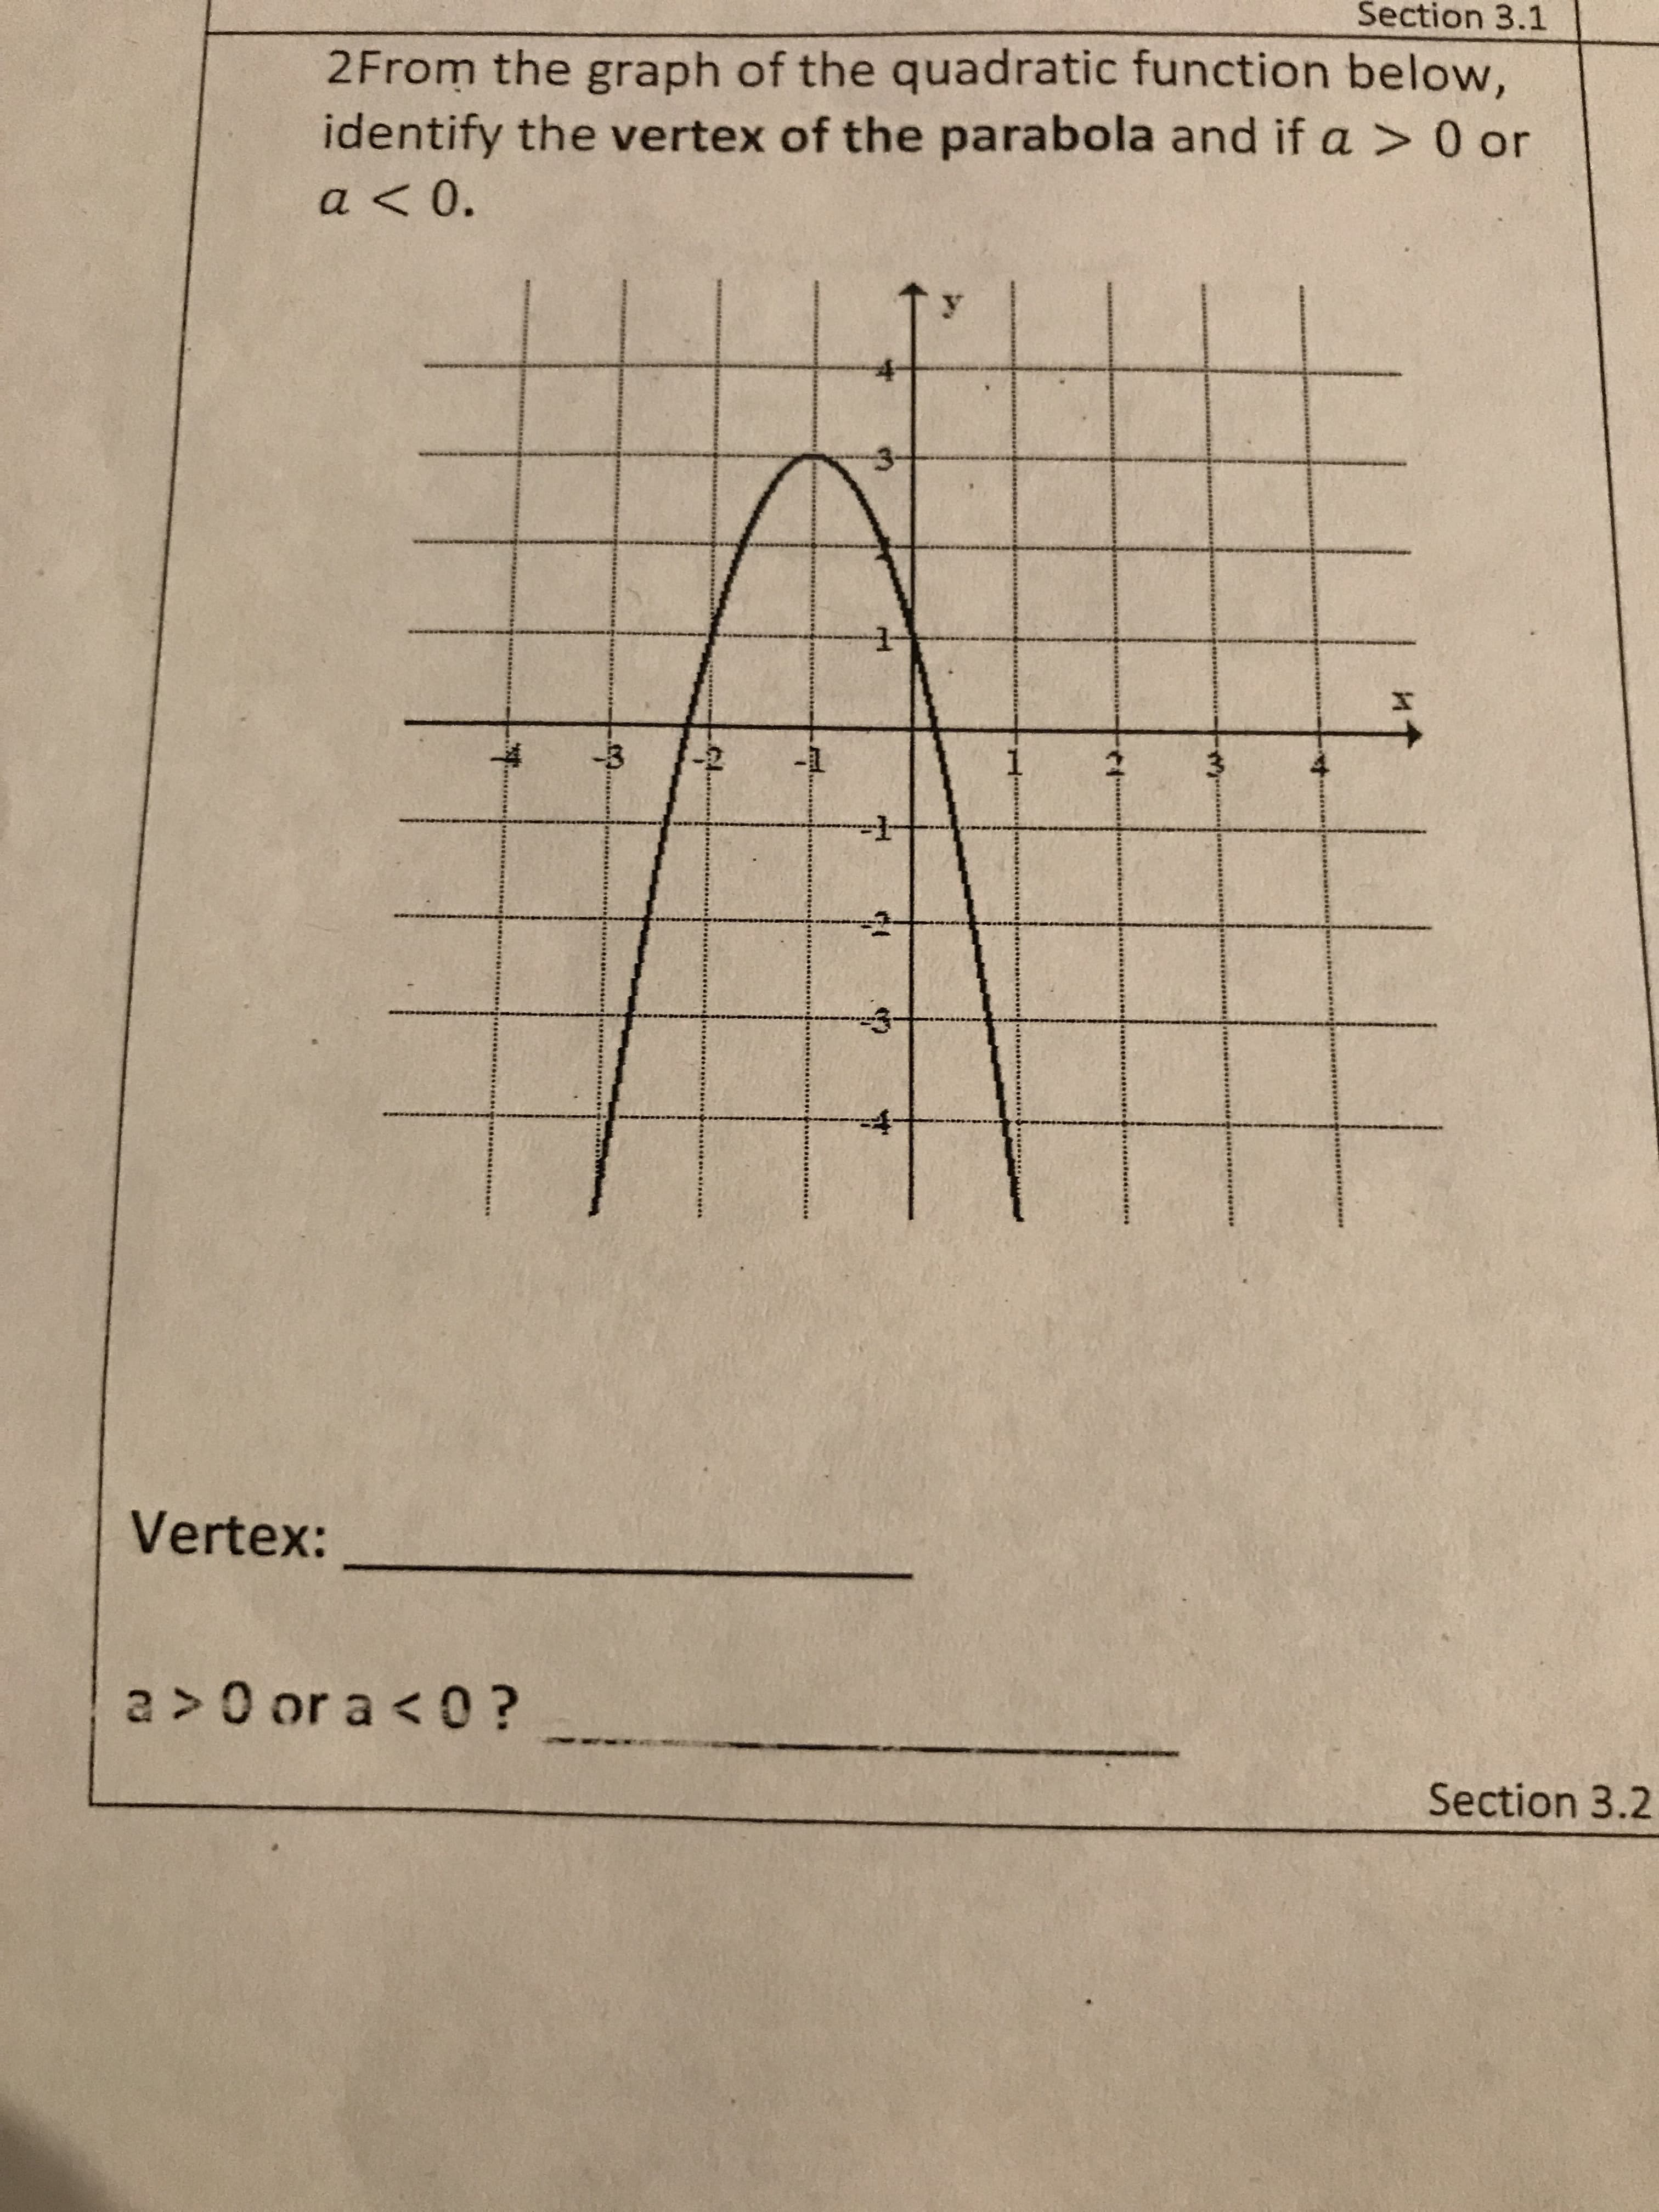 Section 3.1
2From the graph of the quadratic function below,
identify the vertex of the parabola and if a > 0 or
a <0.
1
Vertex:
a > 0 or a < 0?
Section 3.2
